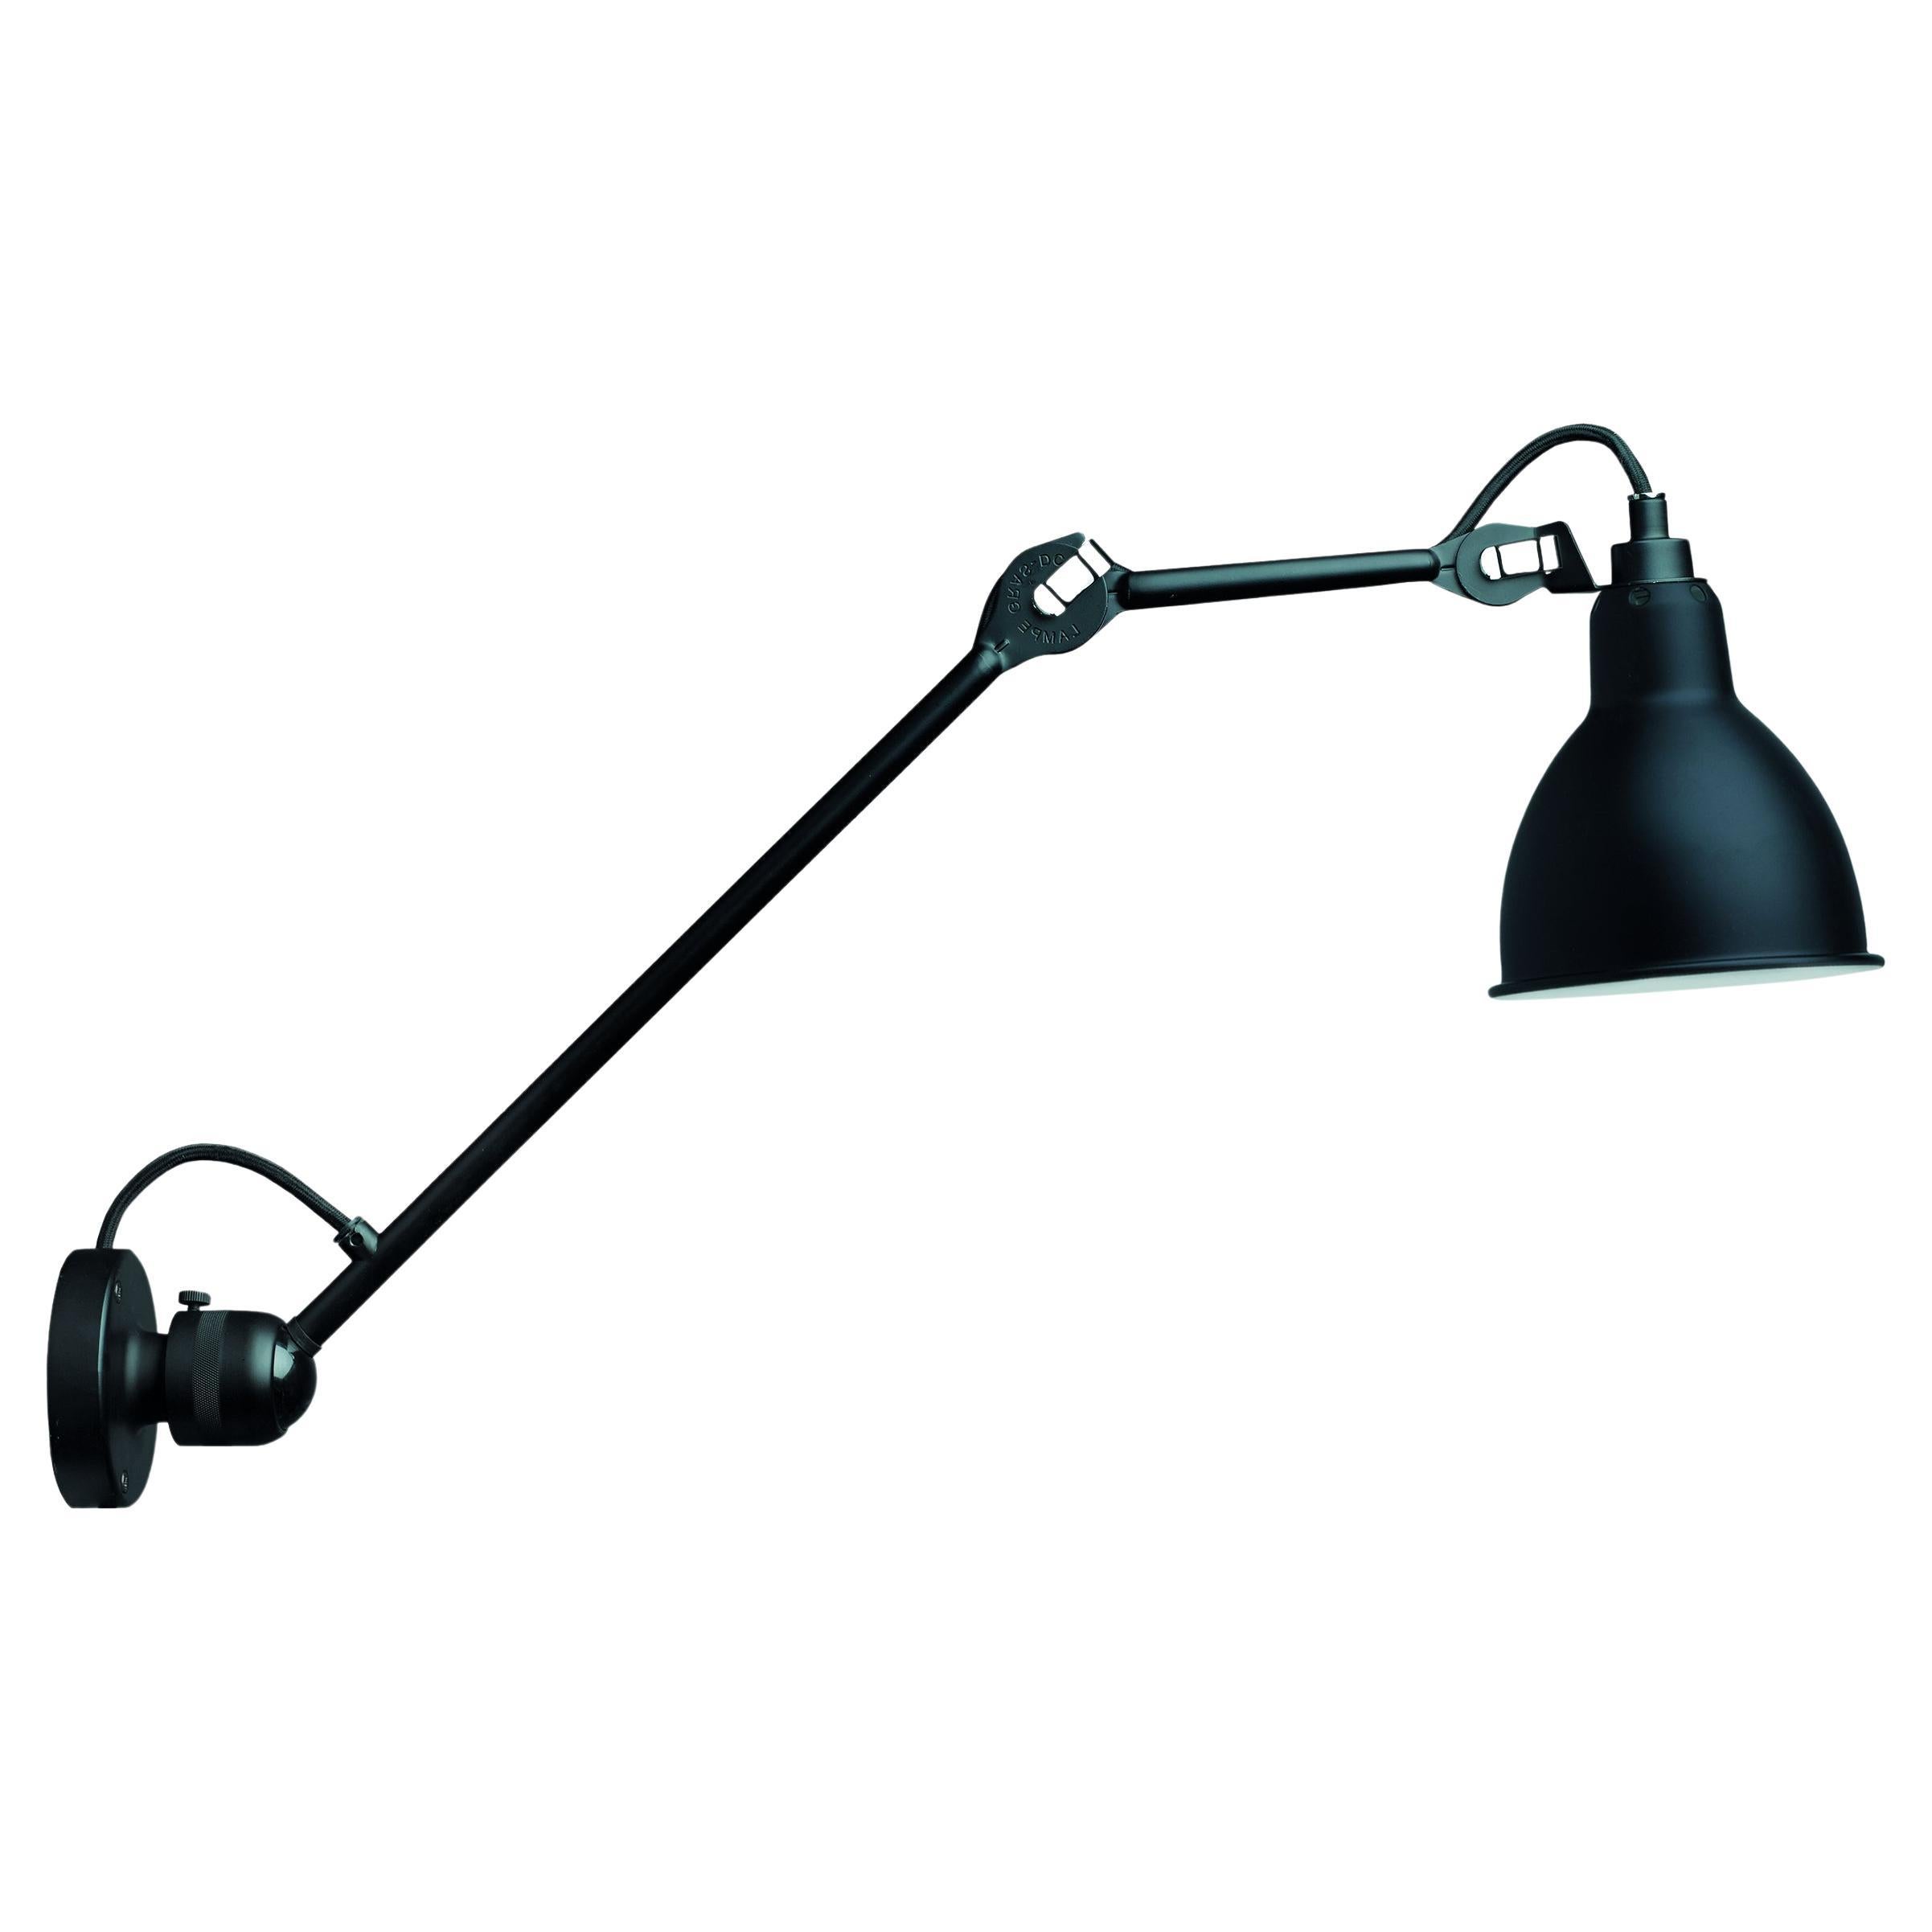 DCW Editions La Lampe Gras N°304 L40 Wall Lamp in Black Arm and Black Shade